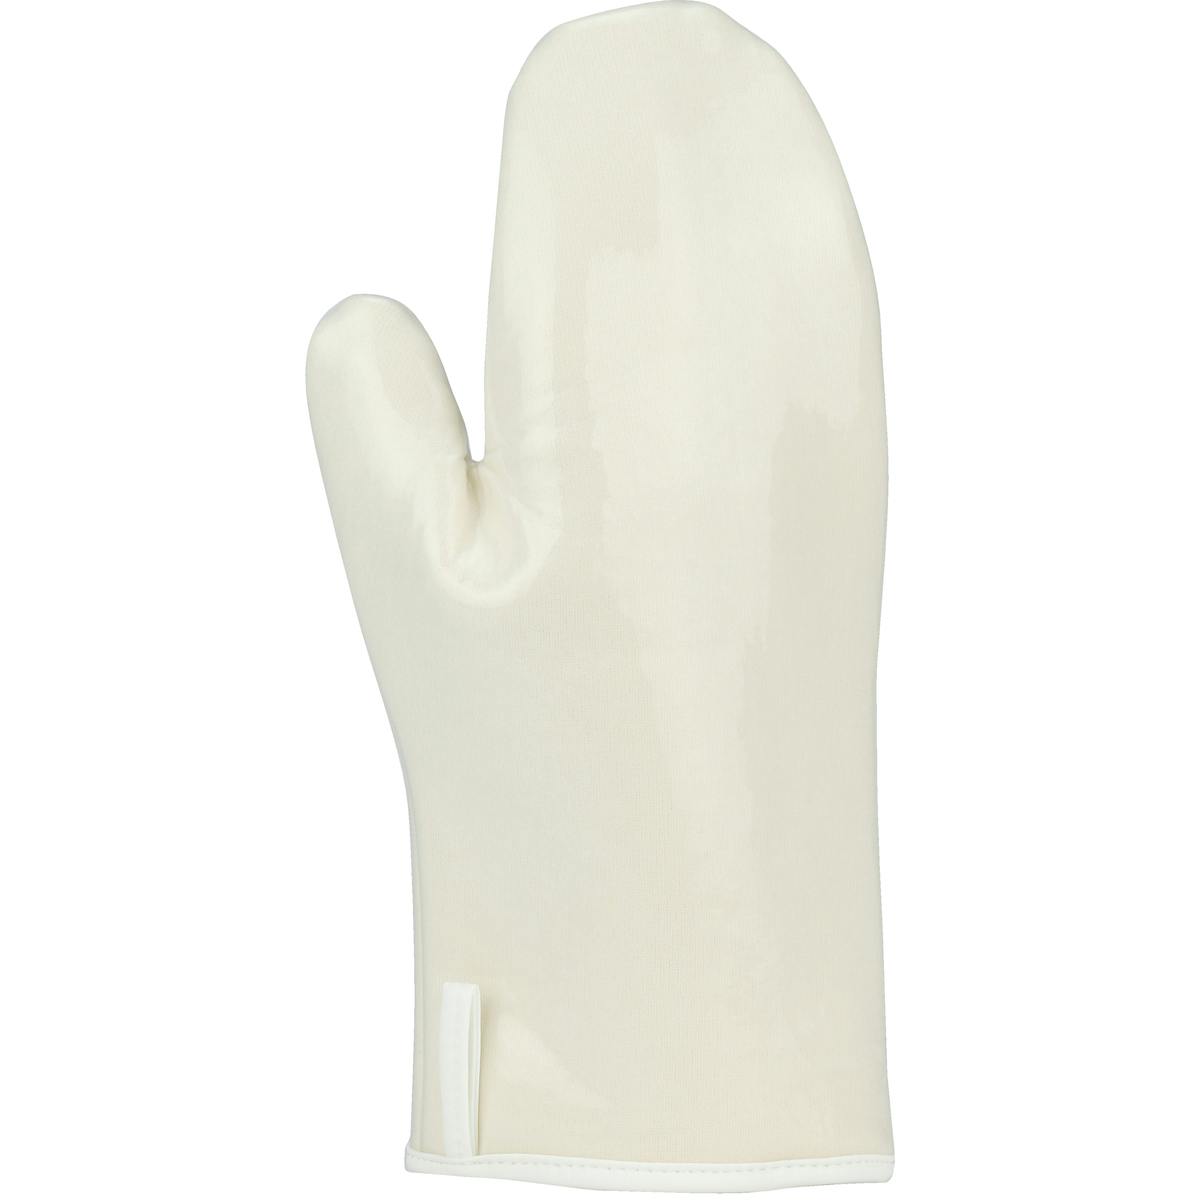 Heat & Cold Resistant Mitt with Silicon Rubber Outer Shell and Nylon Lining - 12", White (73G) - L